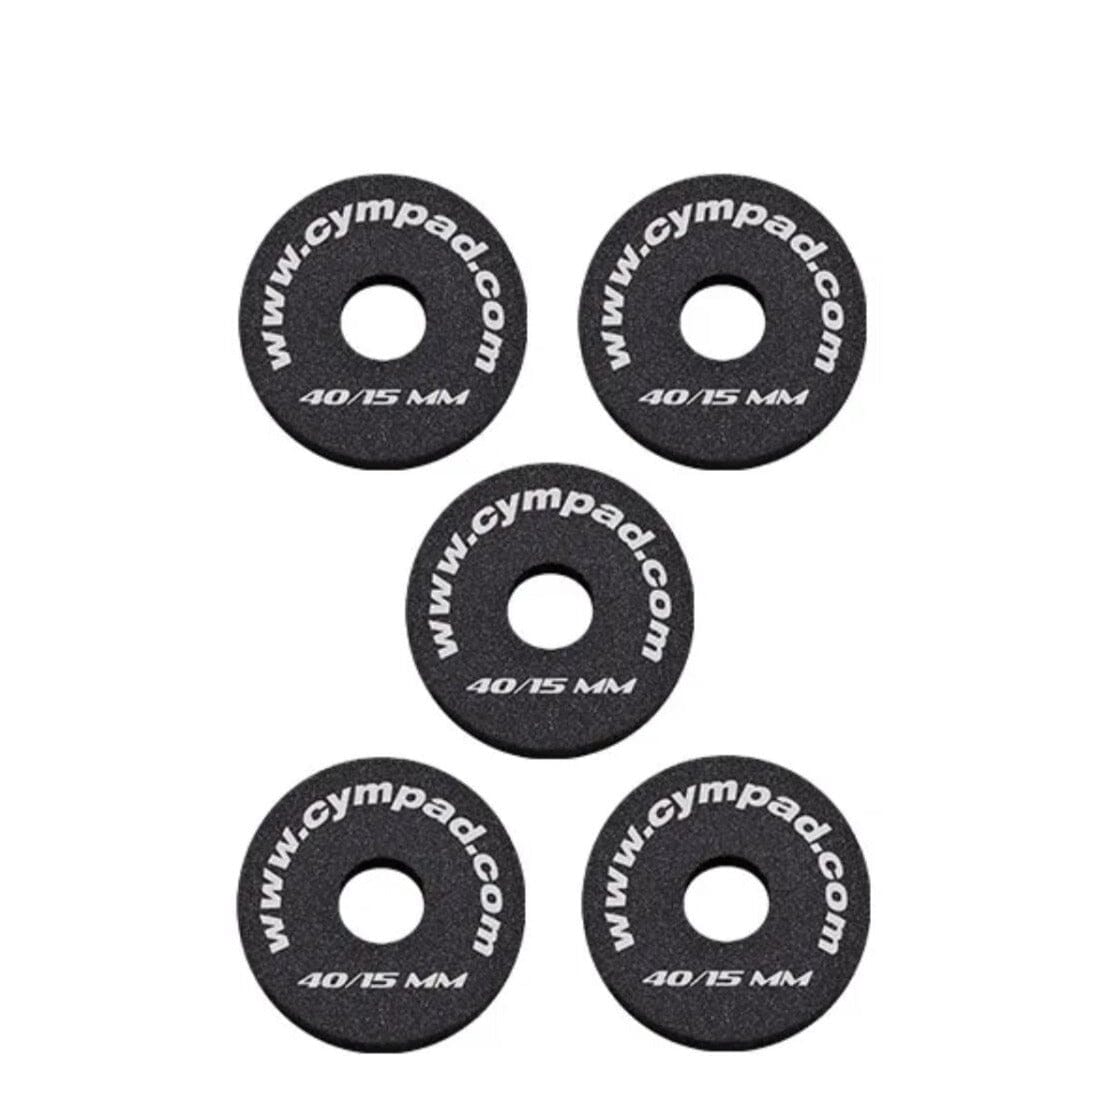 Cympad Optimizer Pack 40/15mm, 5 Pack (OS155) washers Cympad 